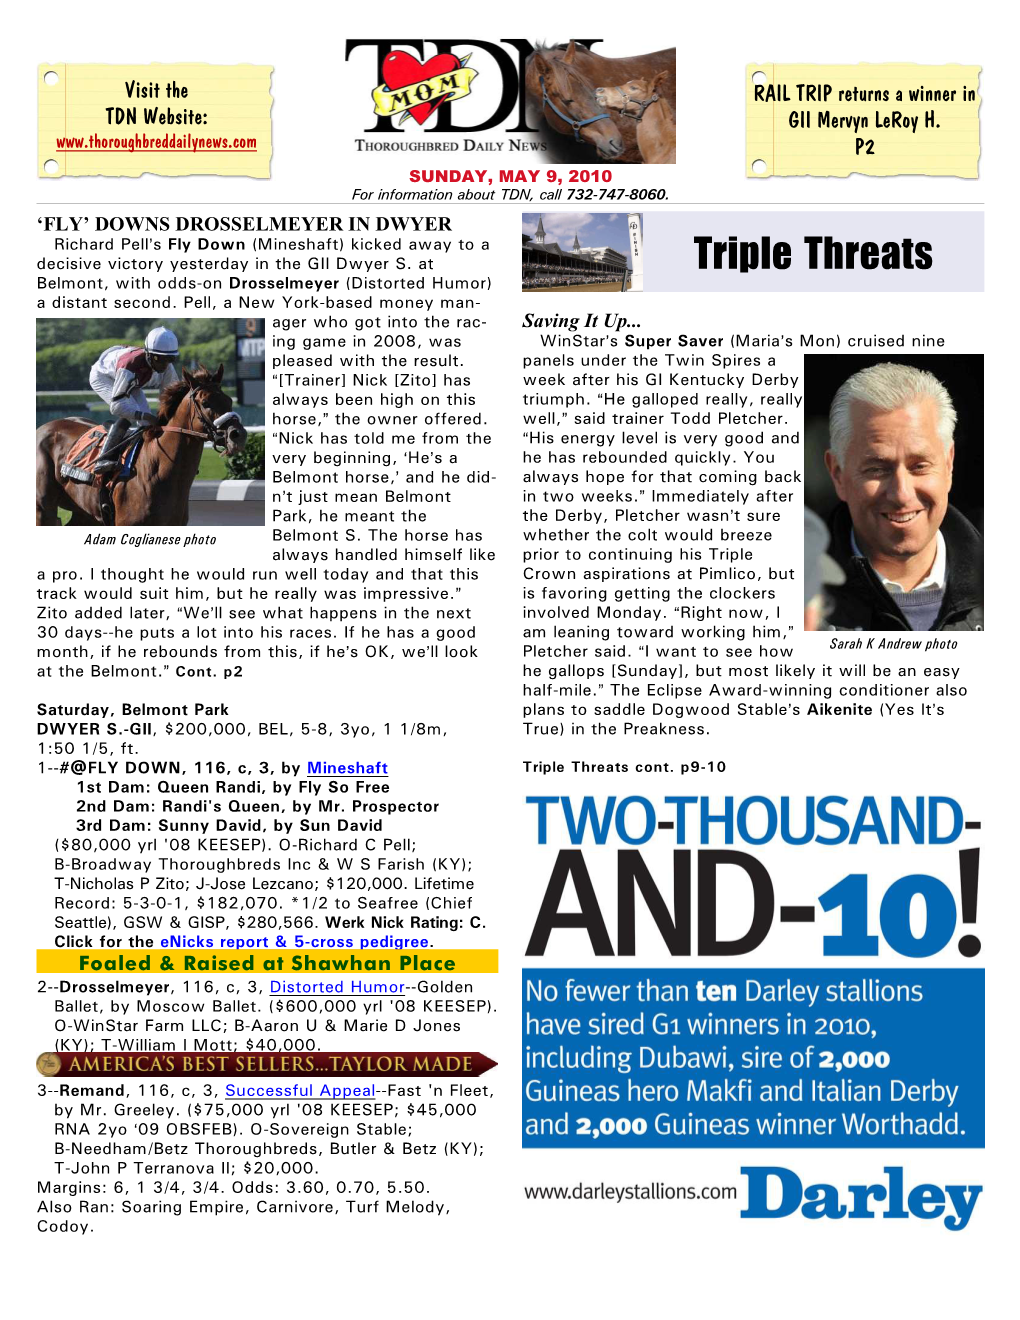 Triple Threats Belmont, with Odds-On Drosselmeyer (Distorted Humor) a Distant Second